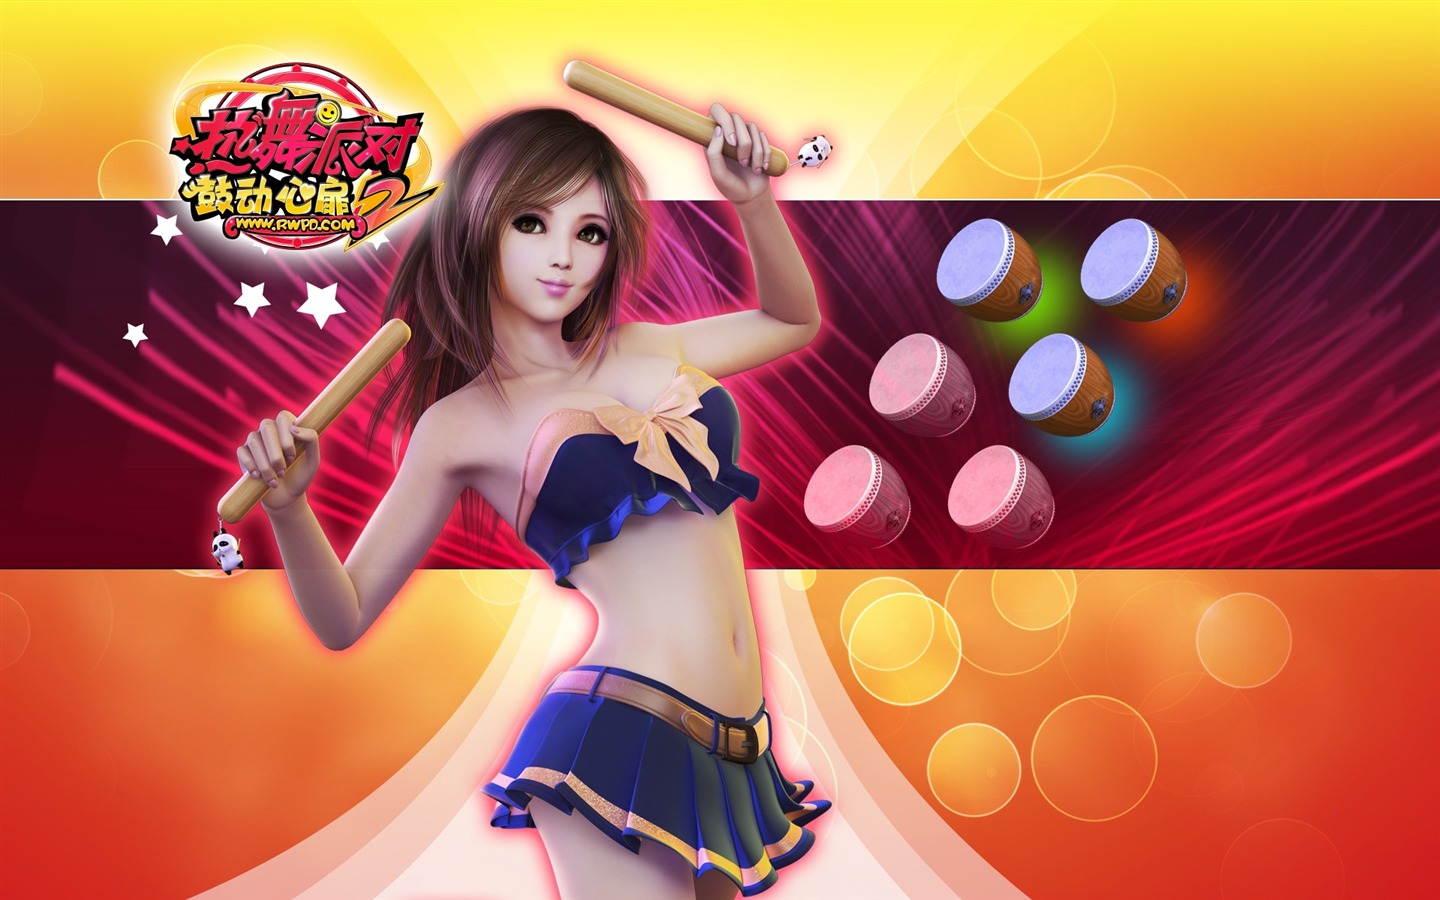 Online game Hot Dance Party II official wallpapers #13 - 1440x900